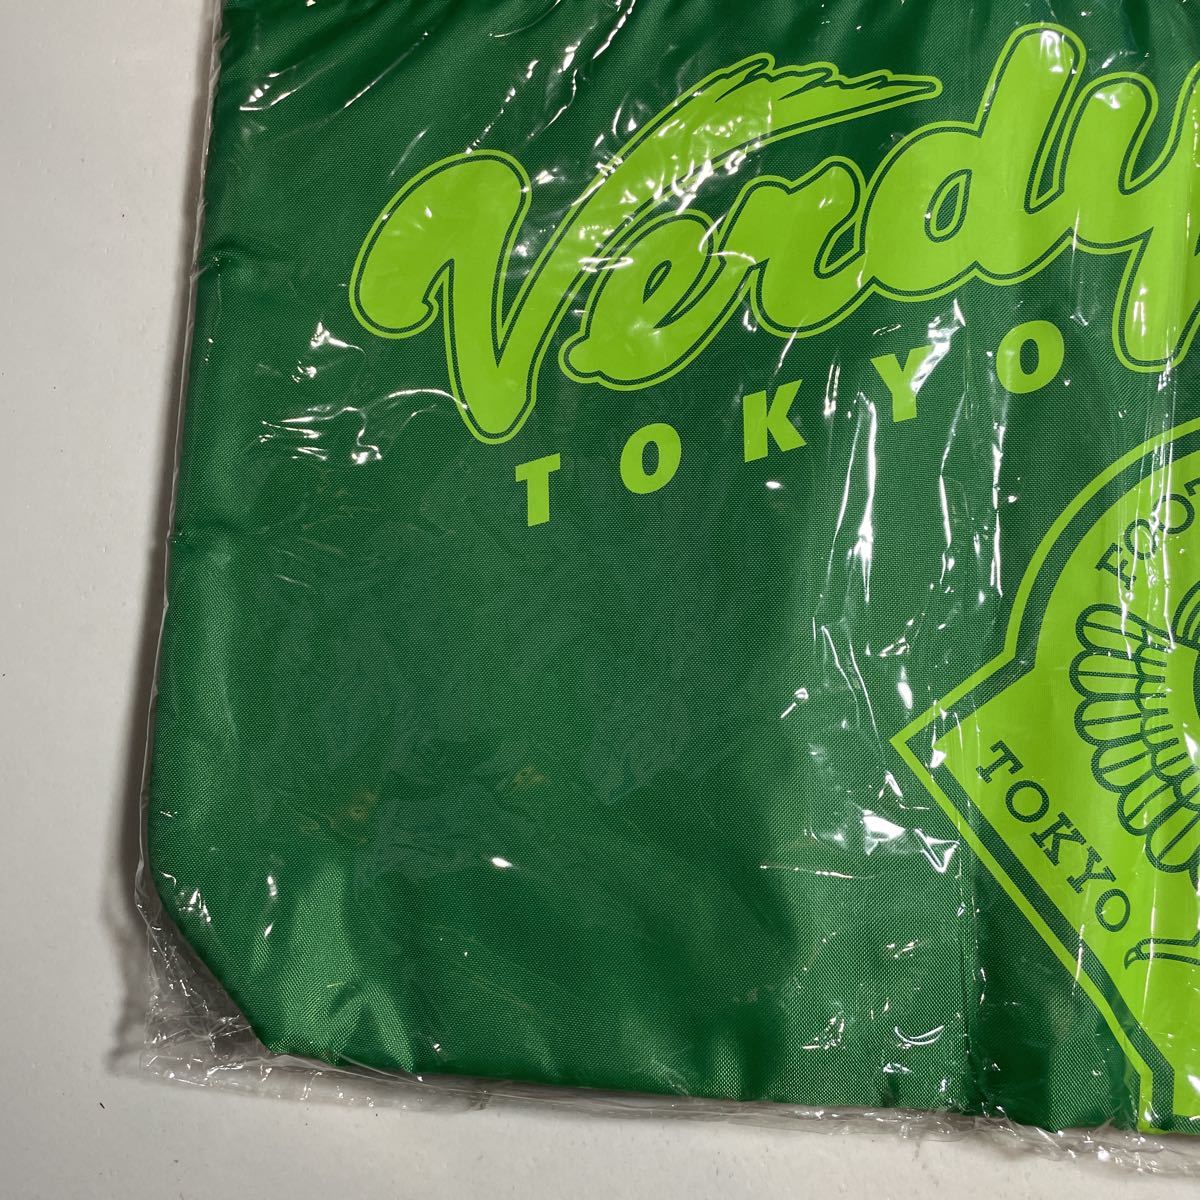  Tokyo ve Rudy 1969 verdy..YOMIURI official official green green cooler,air conditioner tote bag free size unused unopened 